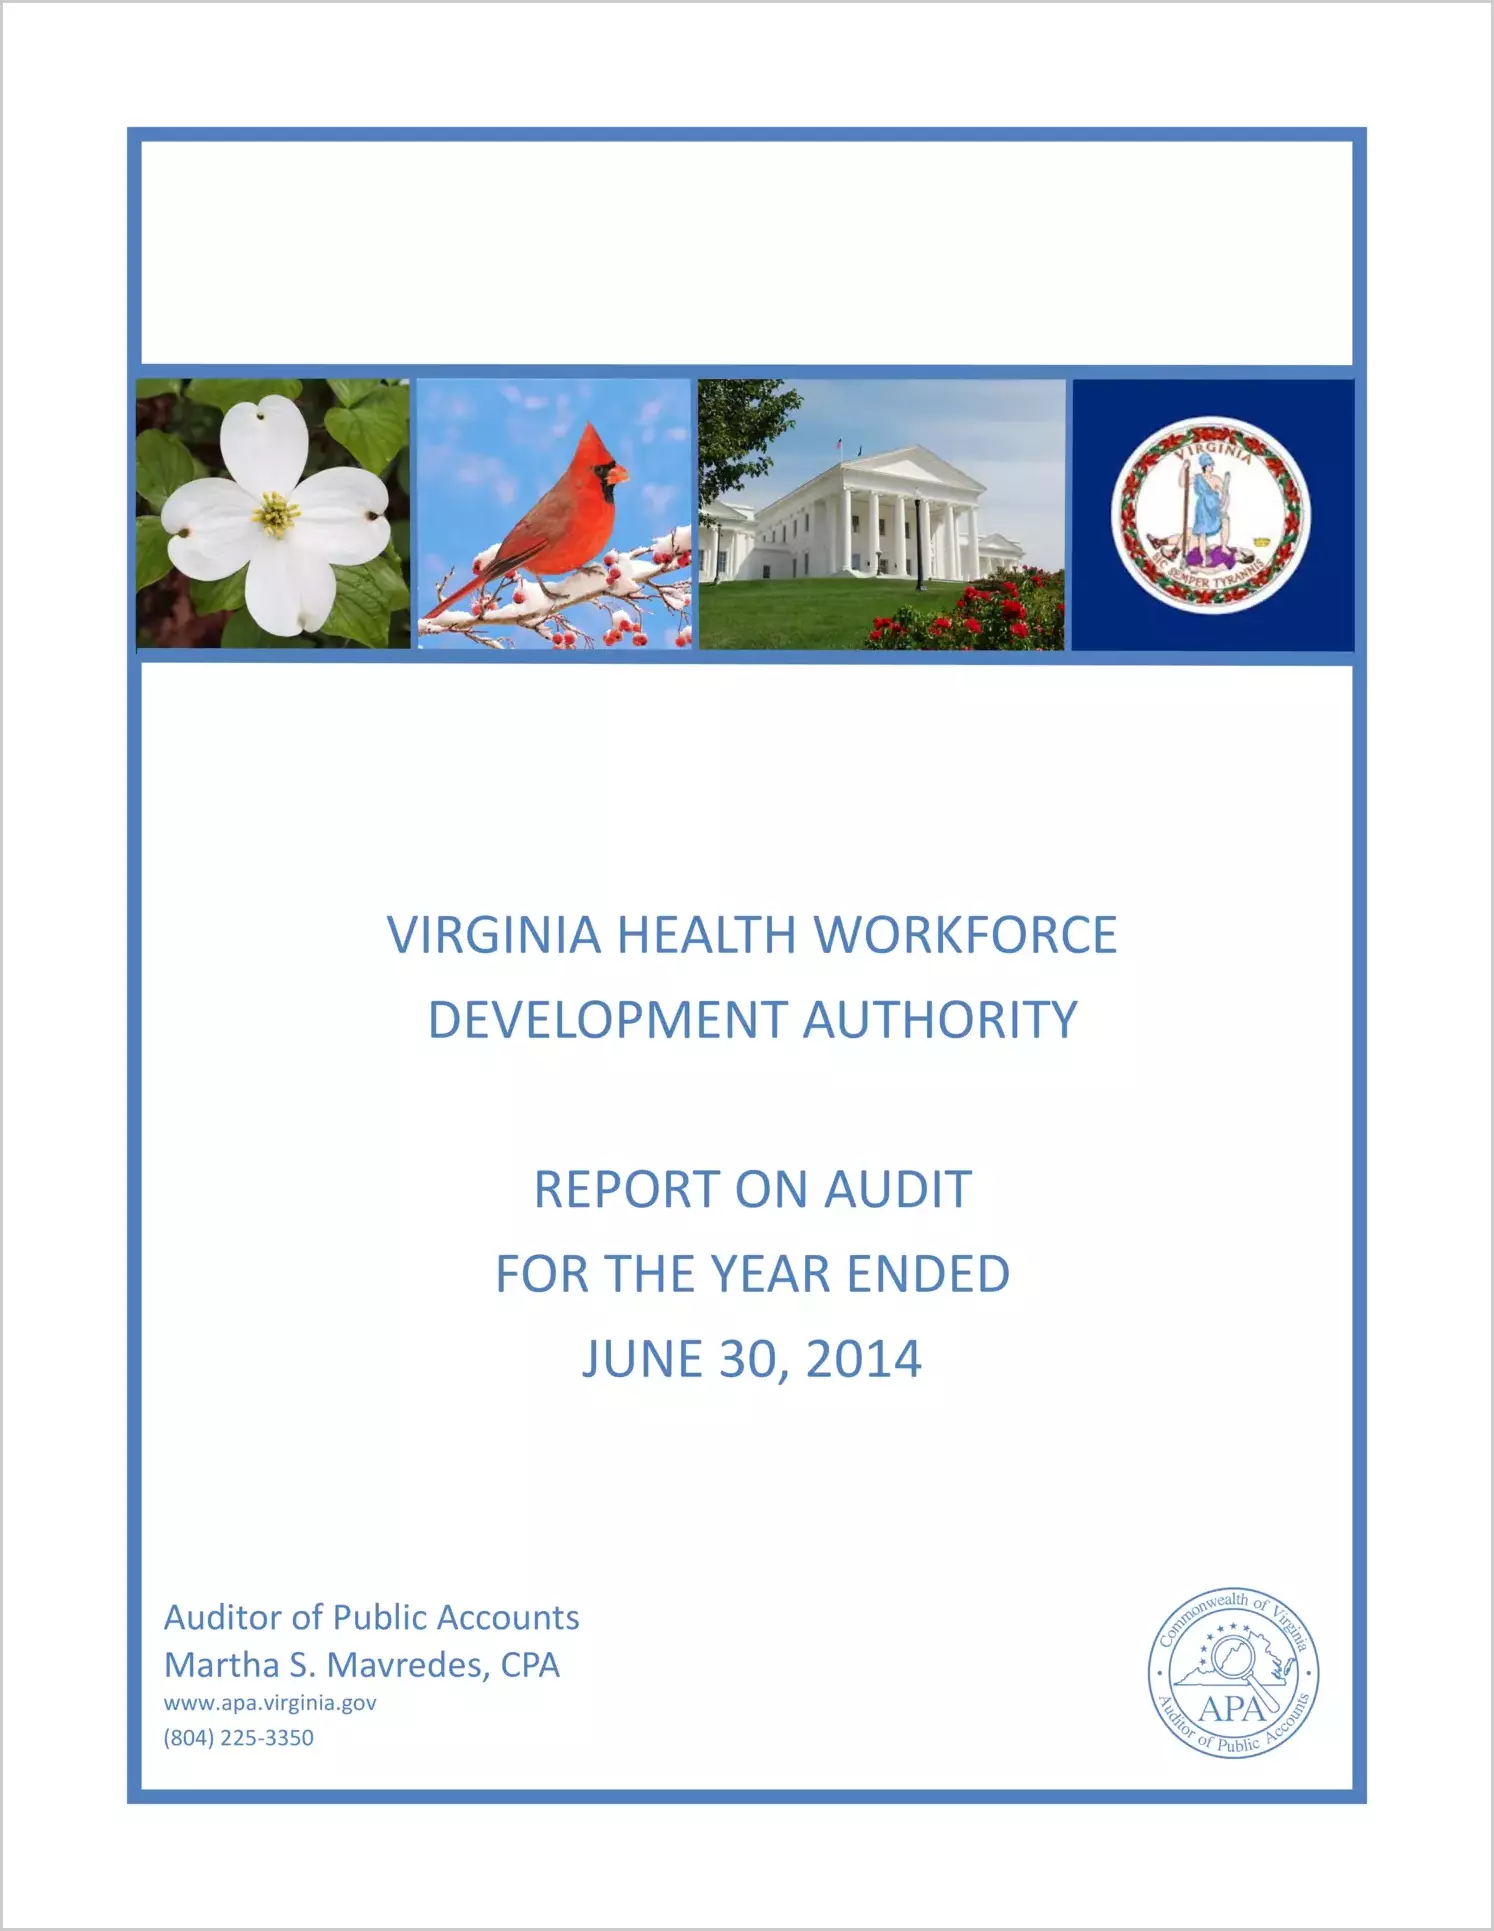 Virginia Health Workforce Development Authority report on audit for the year ended June 30, 2014